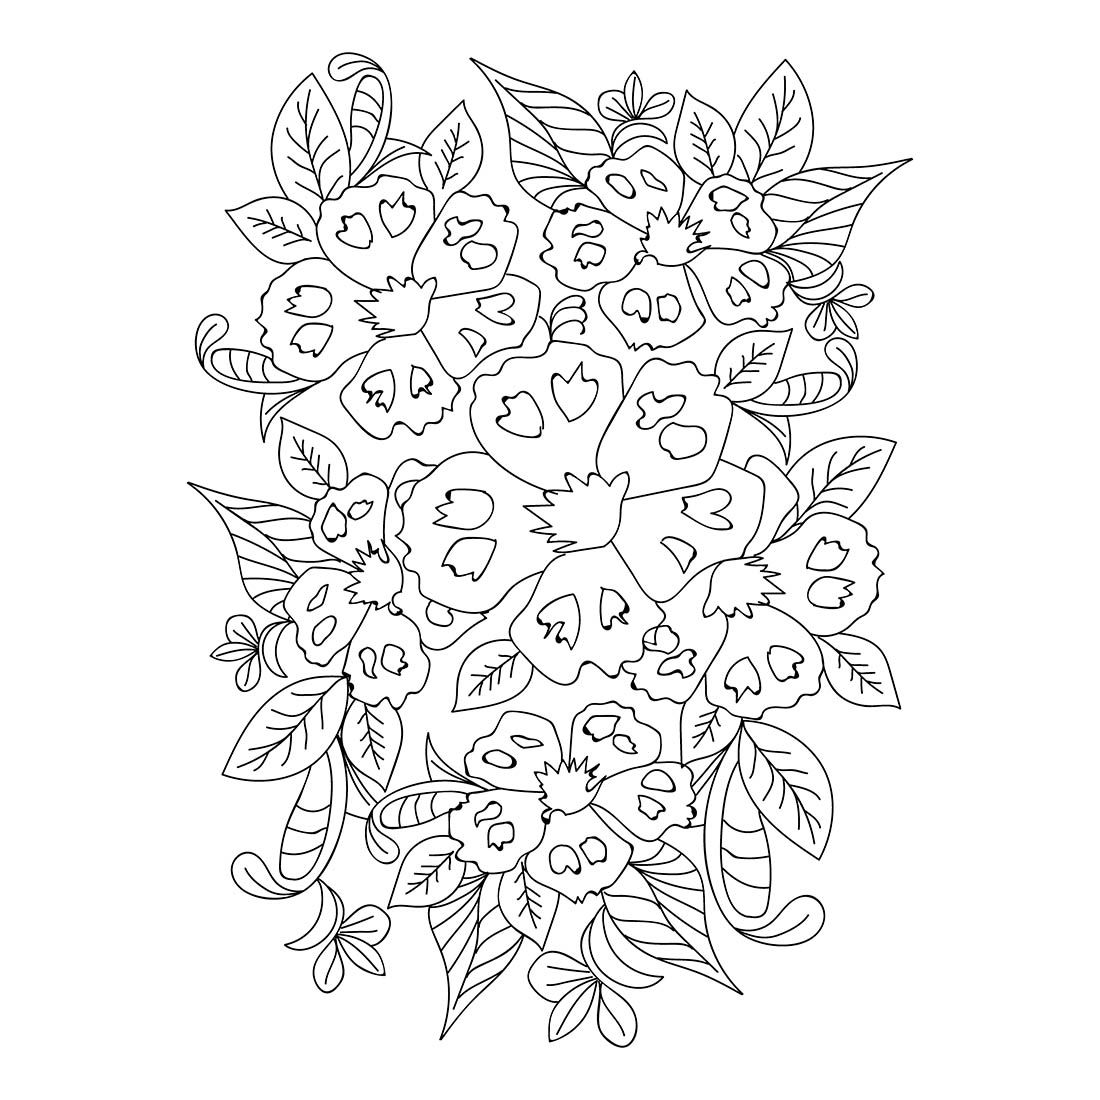 Paisley Henna Tattoo Designs - Get Coloring Pages